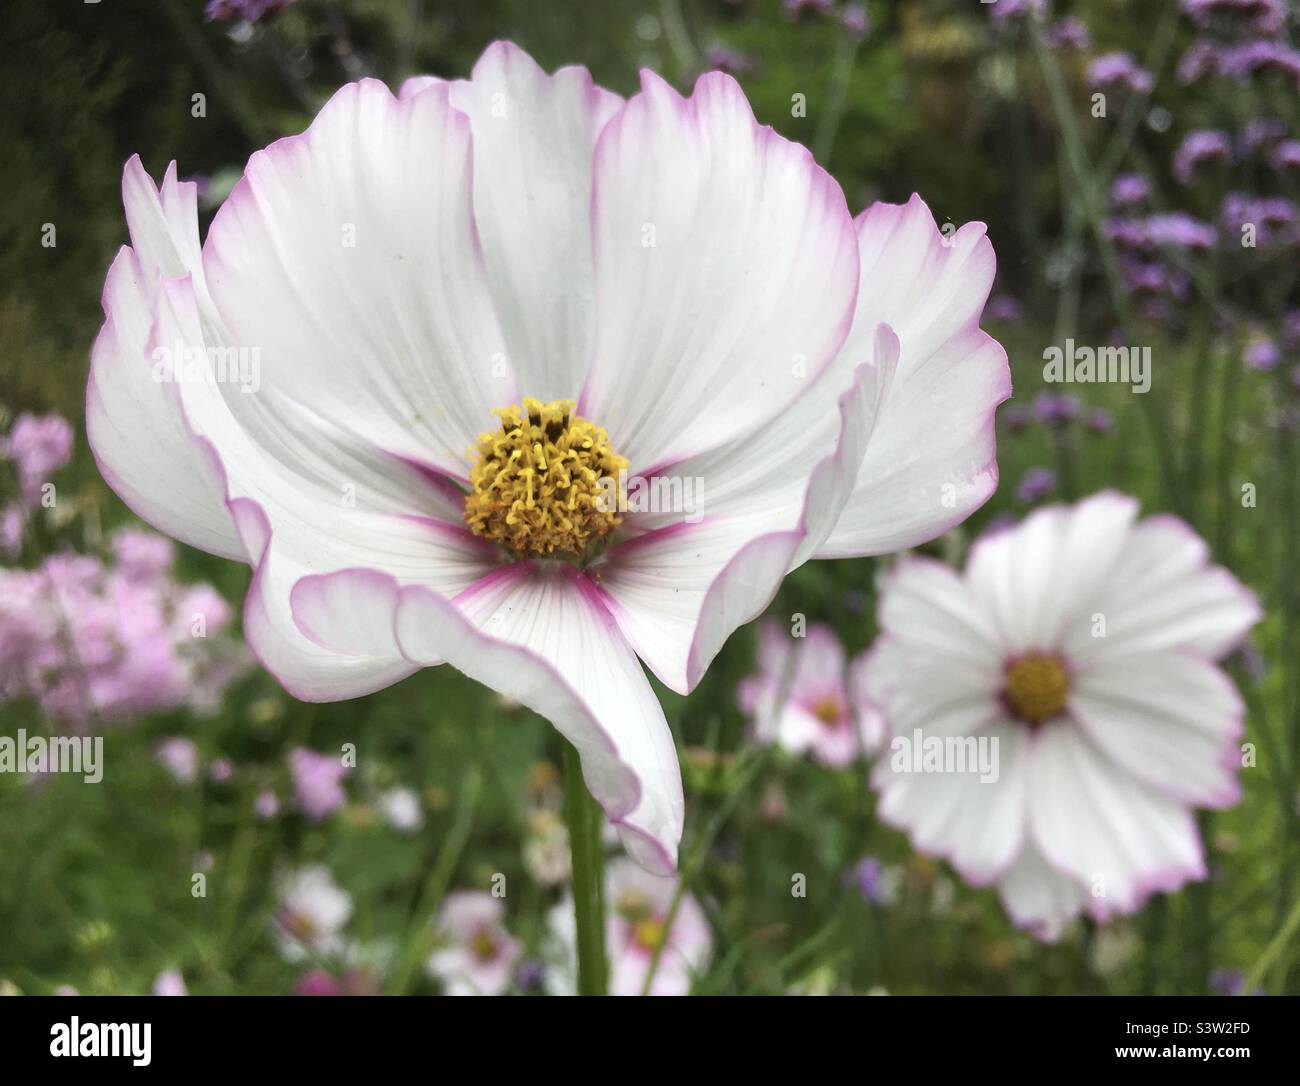 Cosmos, flowers, beauty, grass, green, pink, white, yellow, golden, nature, beauty , love , field Stock Photo